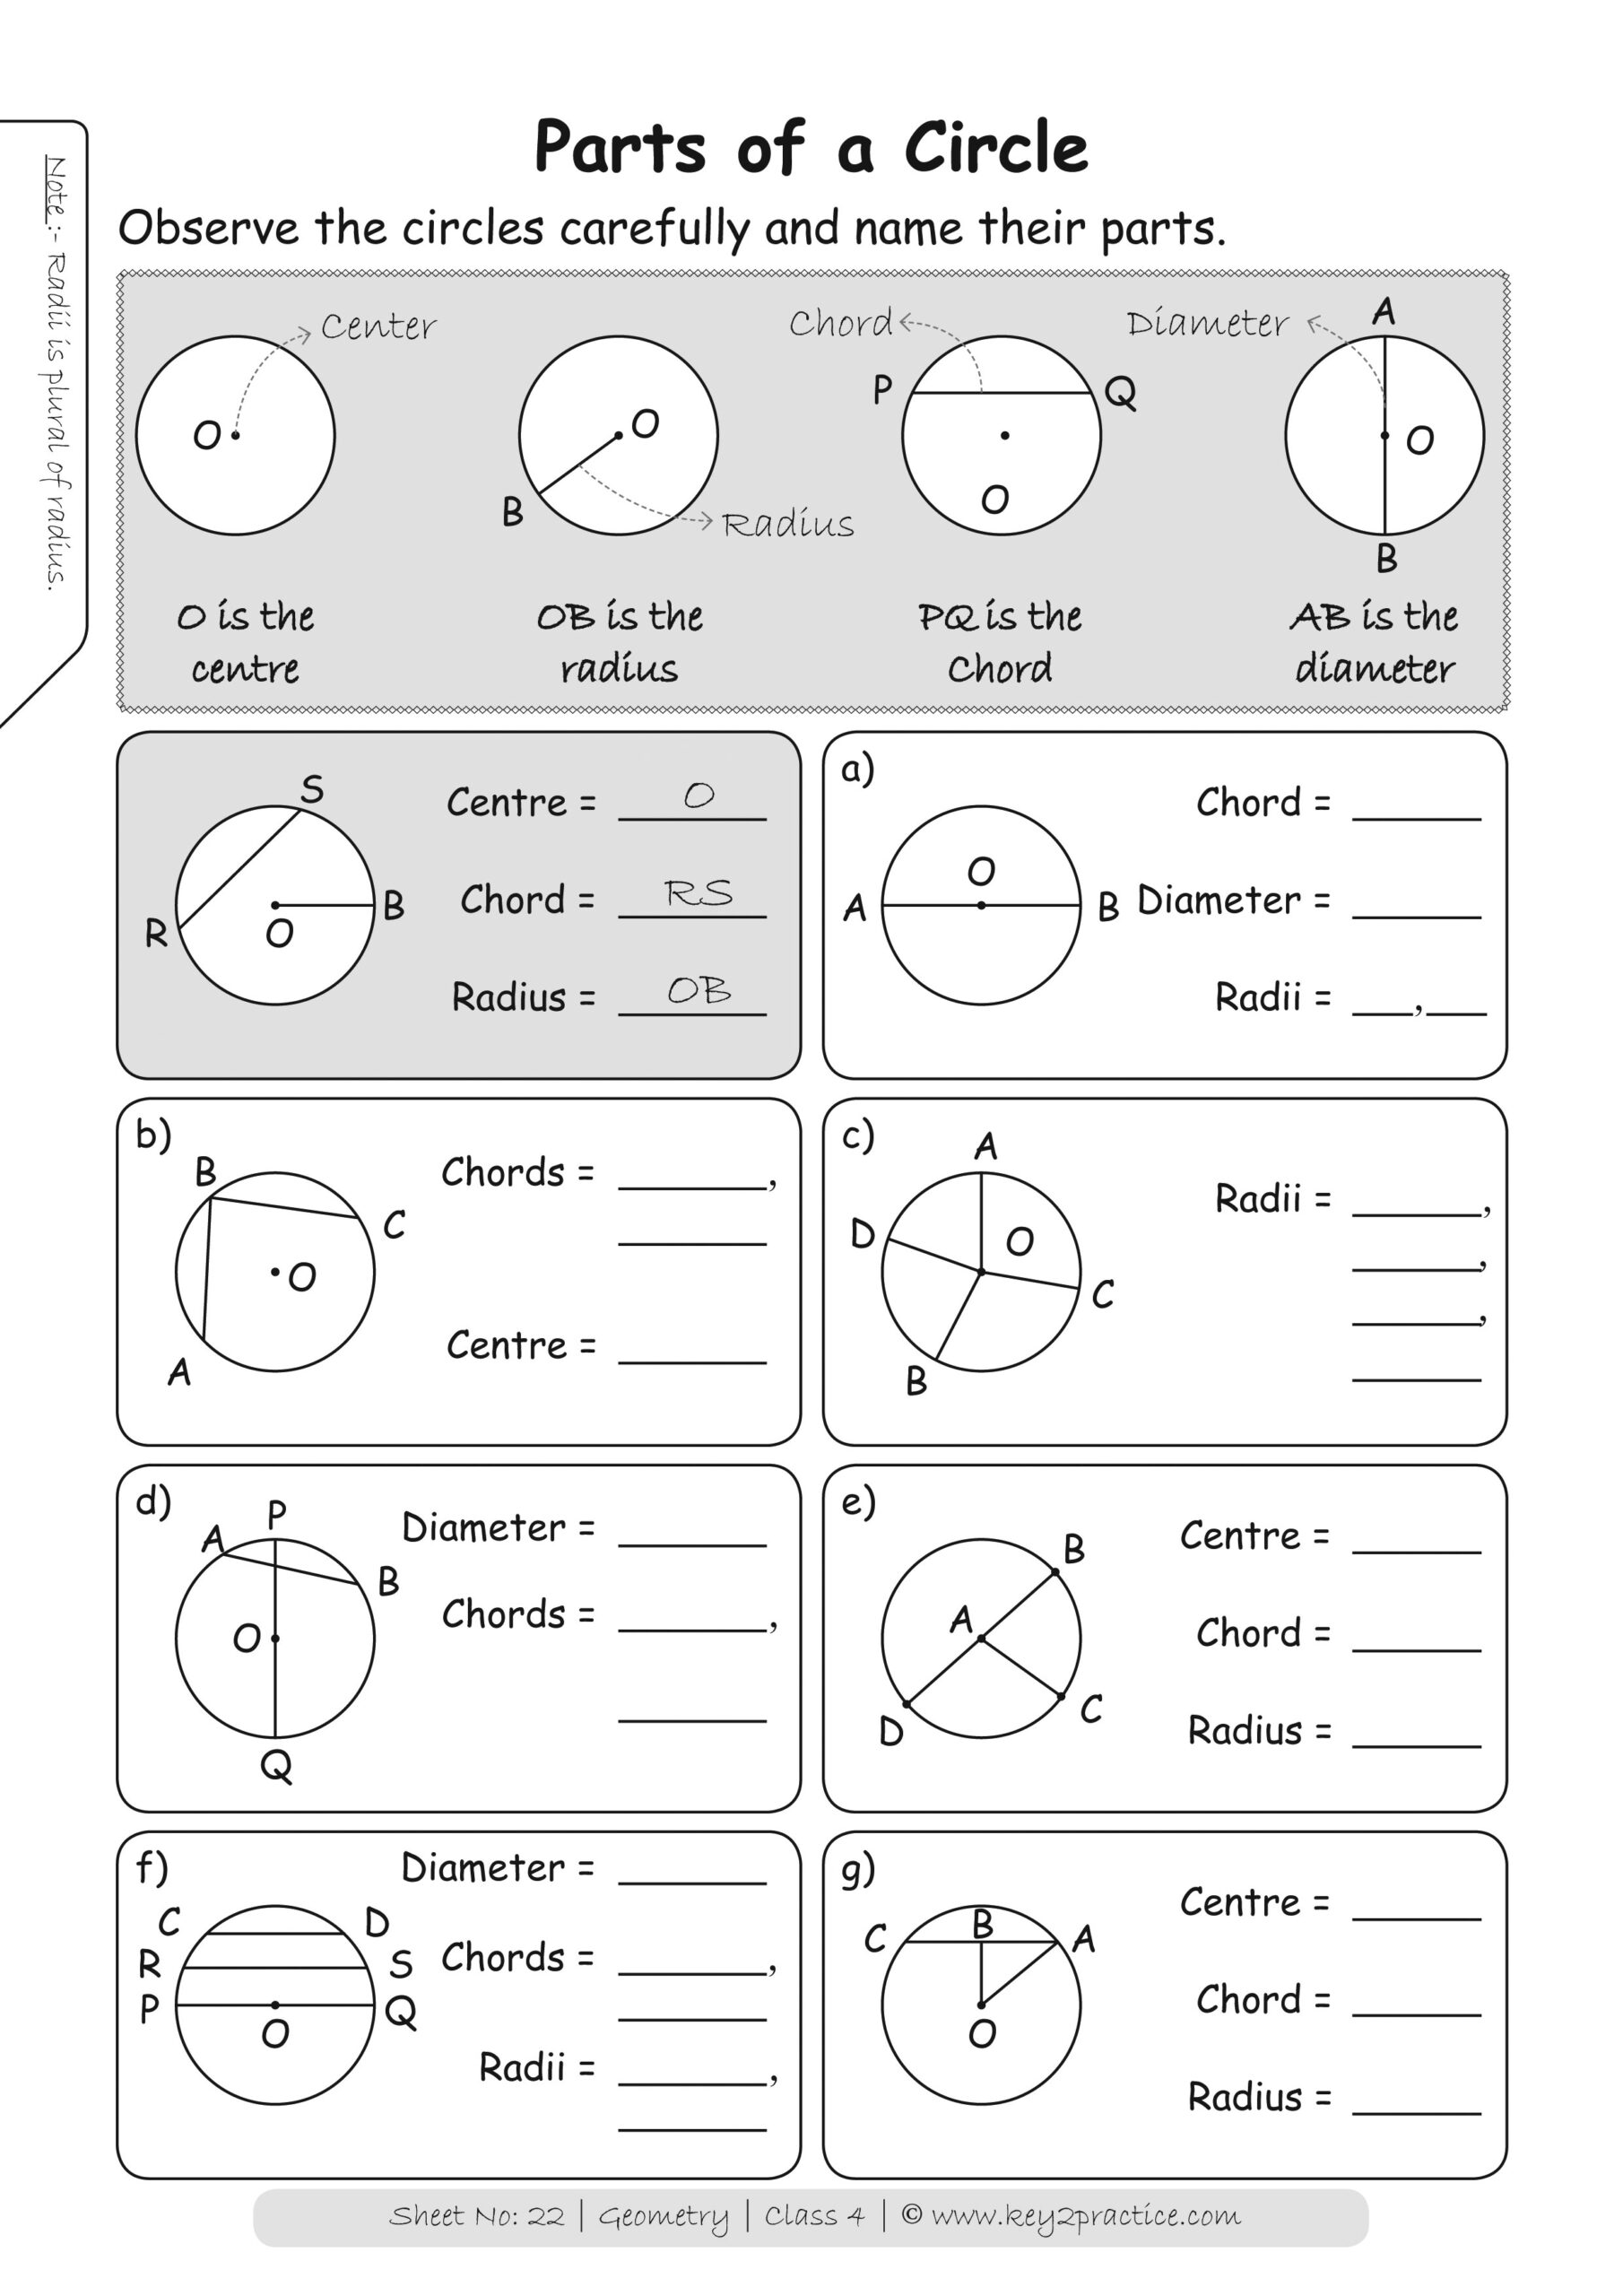 Pack of 4 Maths workbooks for class 4 (Subtraction, Geometry, Time and